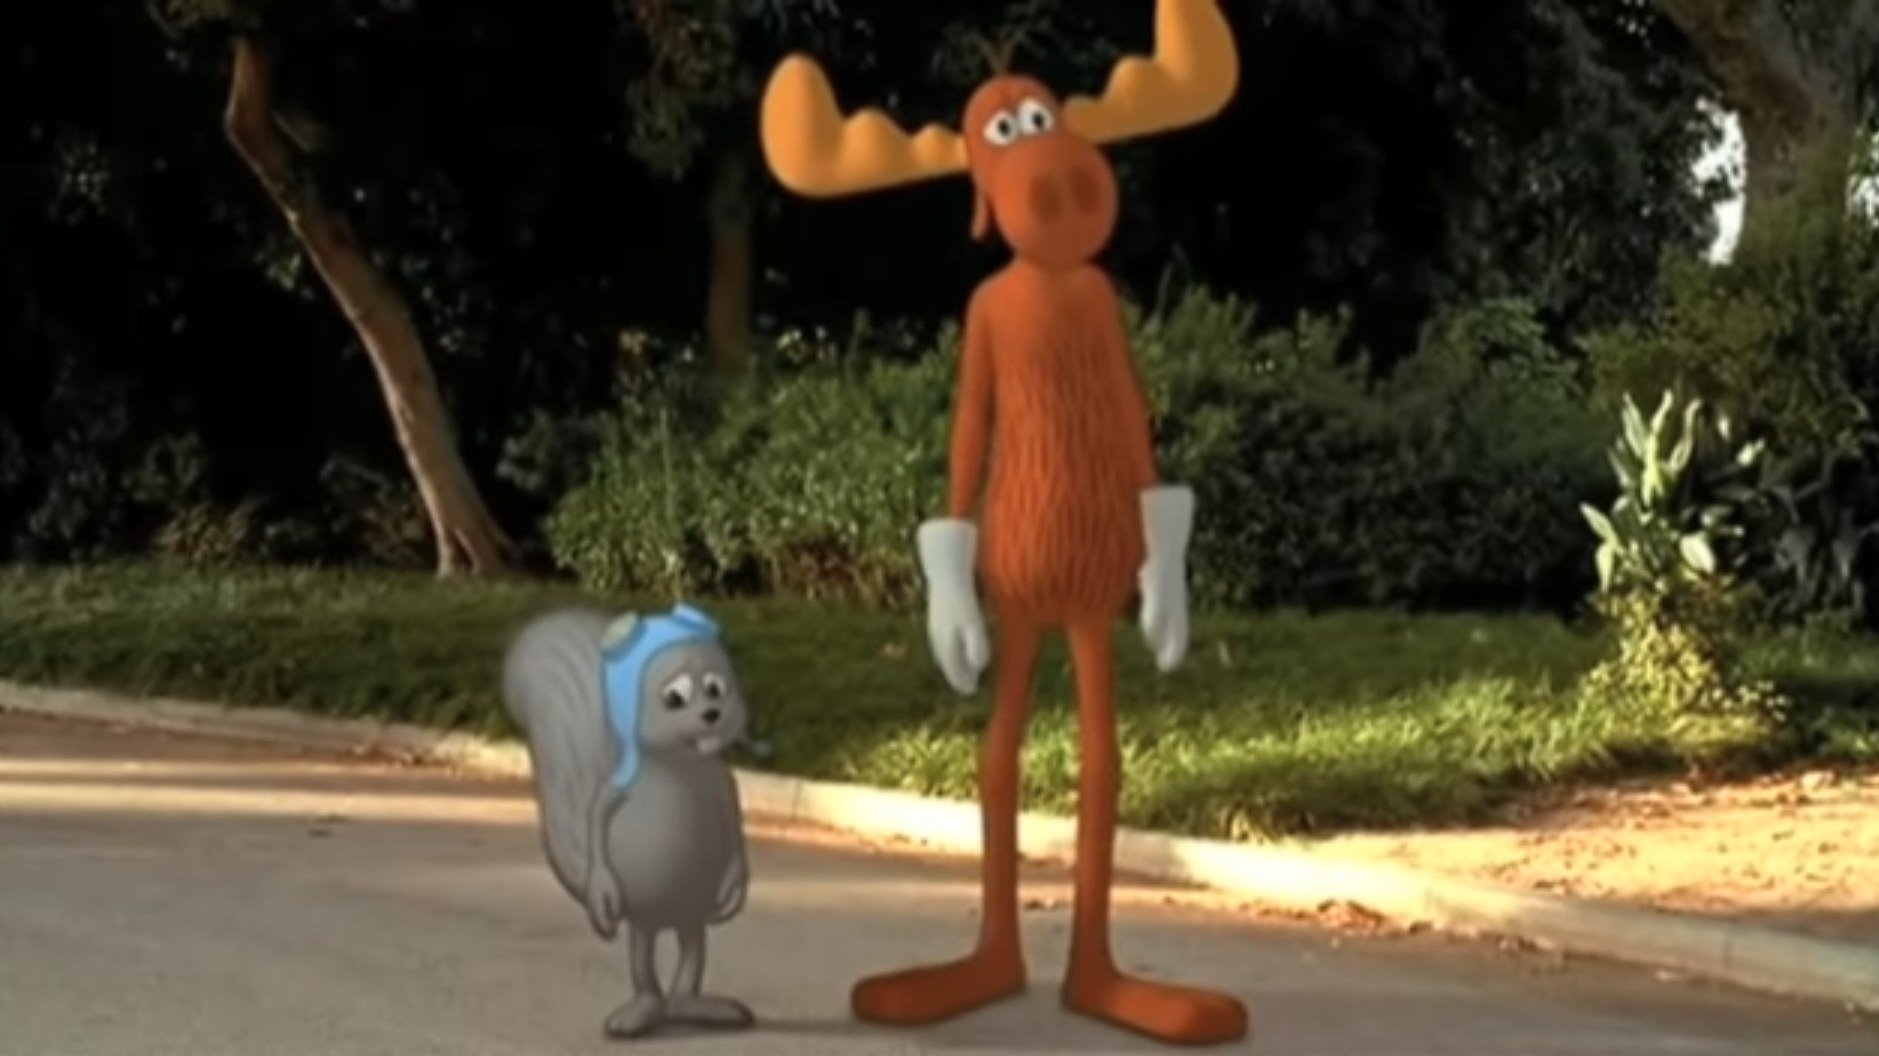 Rocky the flying squirrel and Bullwinkle the moose (both animated) stand in the middle of a real-life street